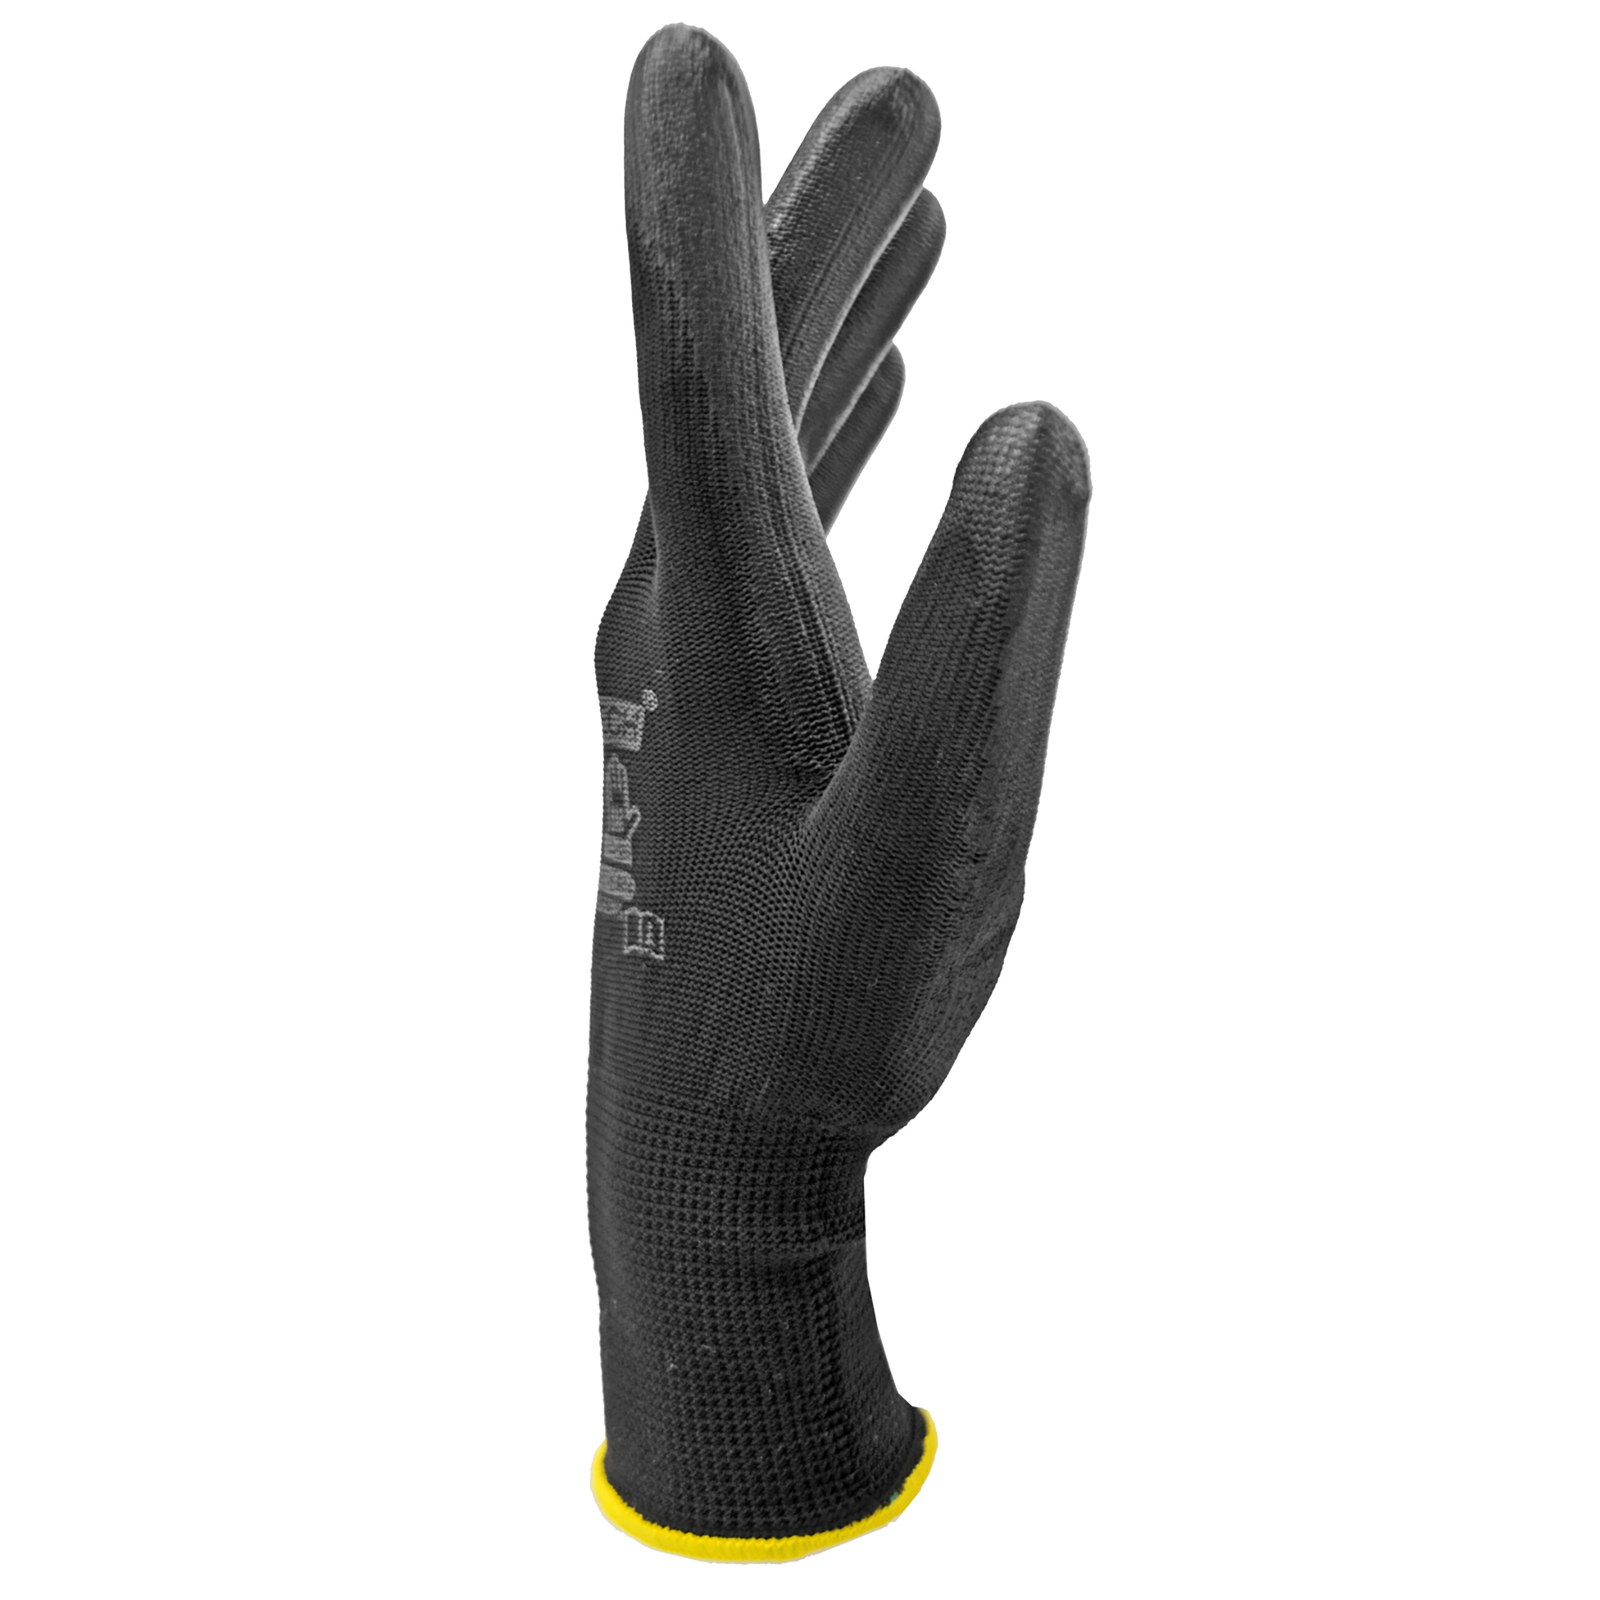 JORESTECH thin safety work glove with polyurethane dipped palms